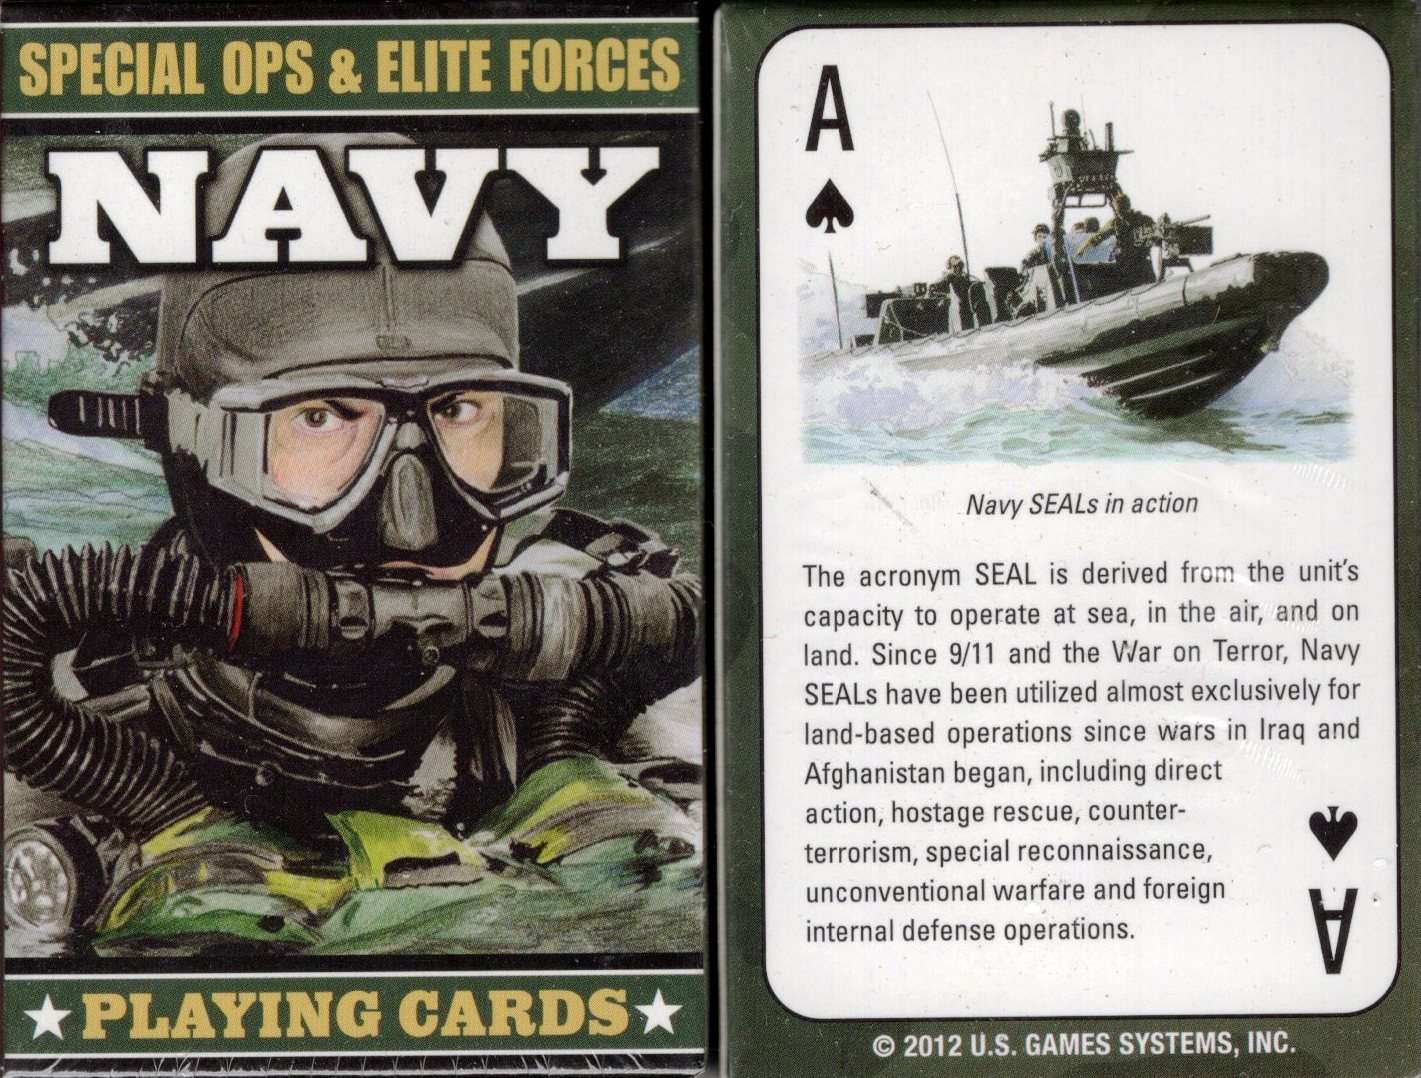 PlayingCardDecks.com-Special Ops & Elite Forces Navy Playing Cards USGS